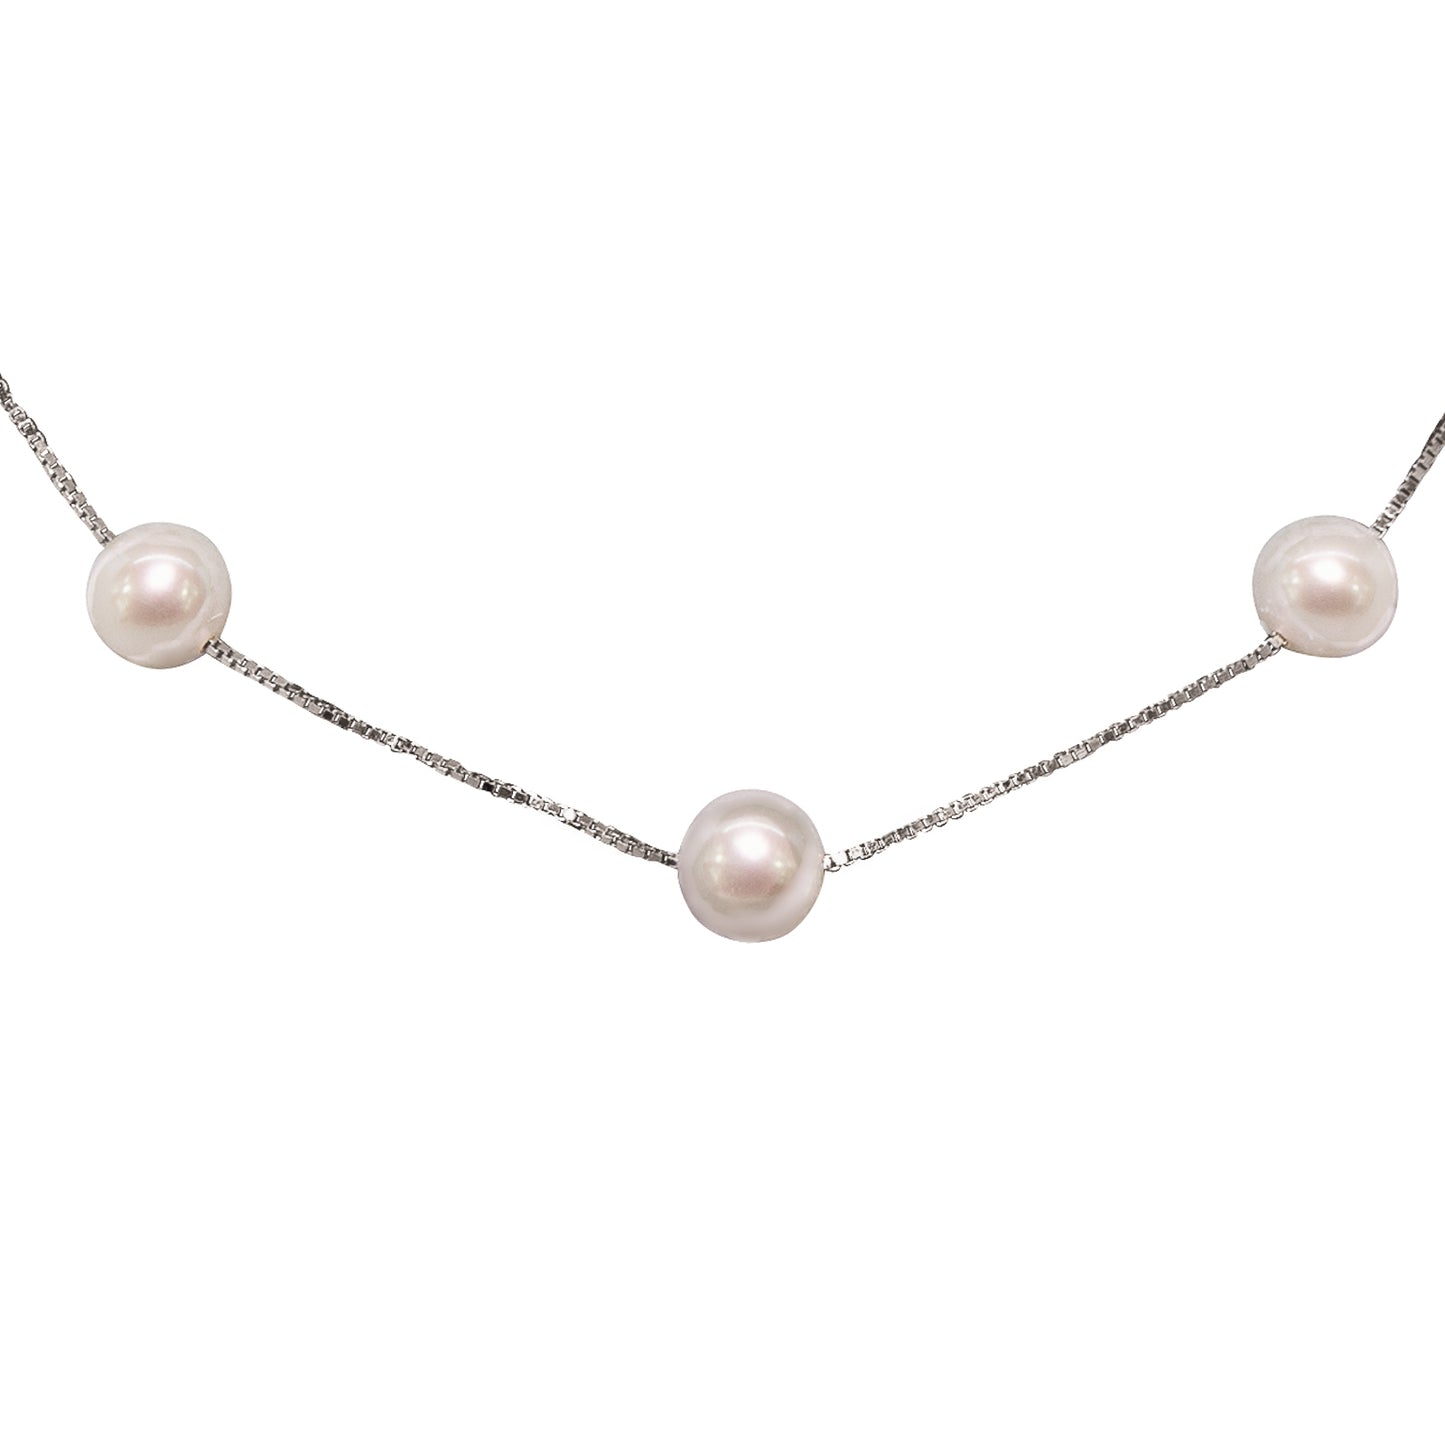 Interlude of Pearls Silver Necklace